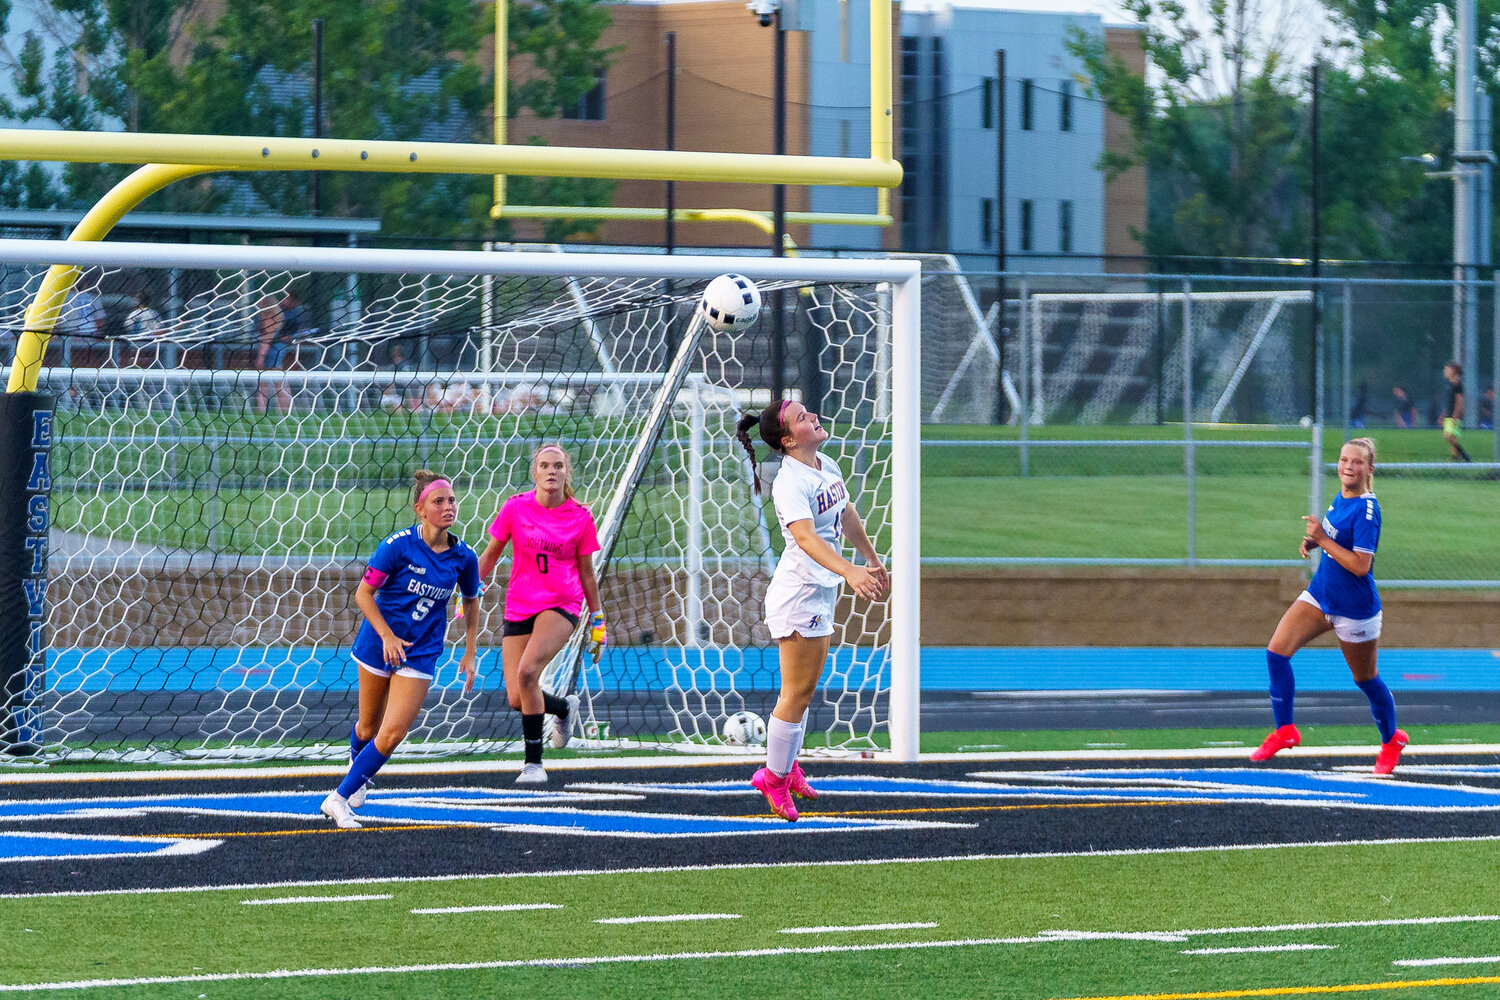 Brie Balster makes a great effort to head in a lob near the Eastview goal. Unfortunately, the setup shot was a little too high for the not so tall Balster, who had a good laugh after the attempt.